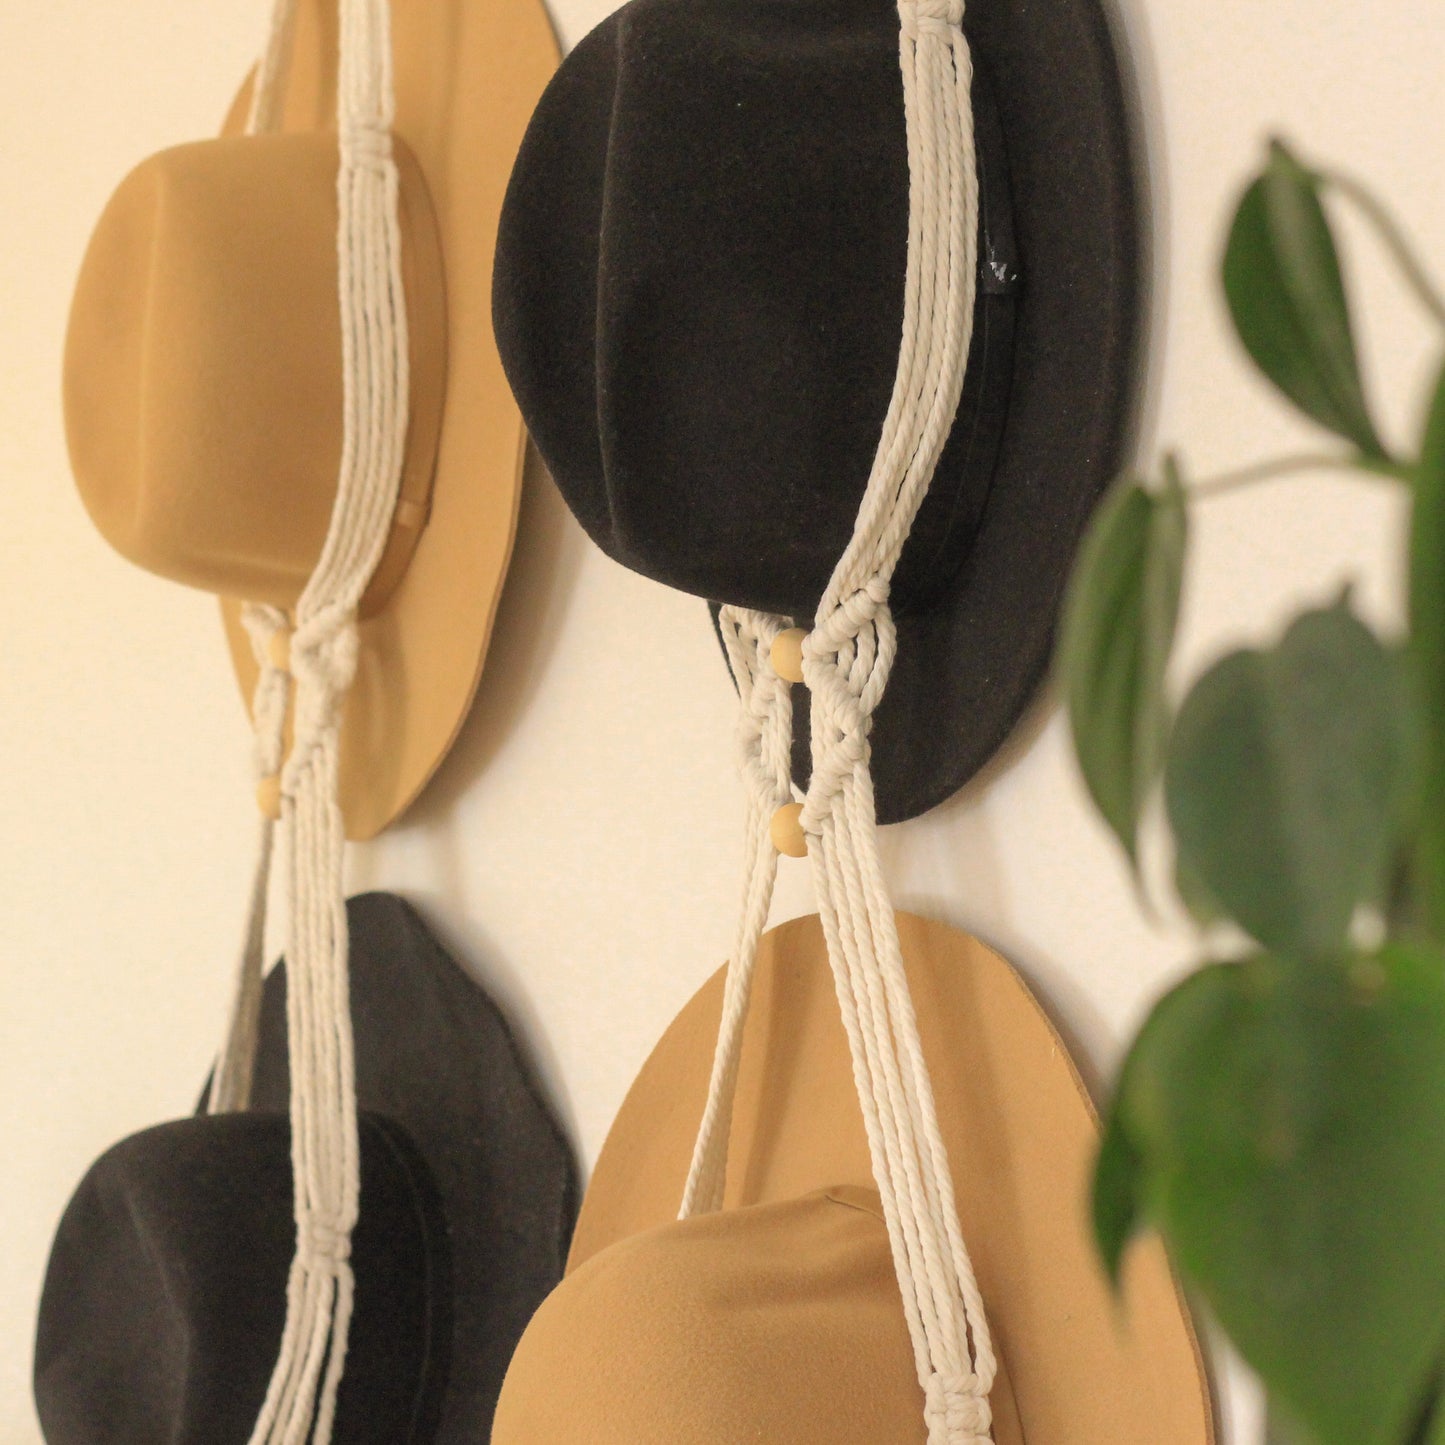 Macrame hat hangers, close up on an angle with a green leafy plant in the forground. Black and tan coloured akubra style hats are hung in the macrame